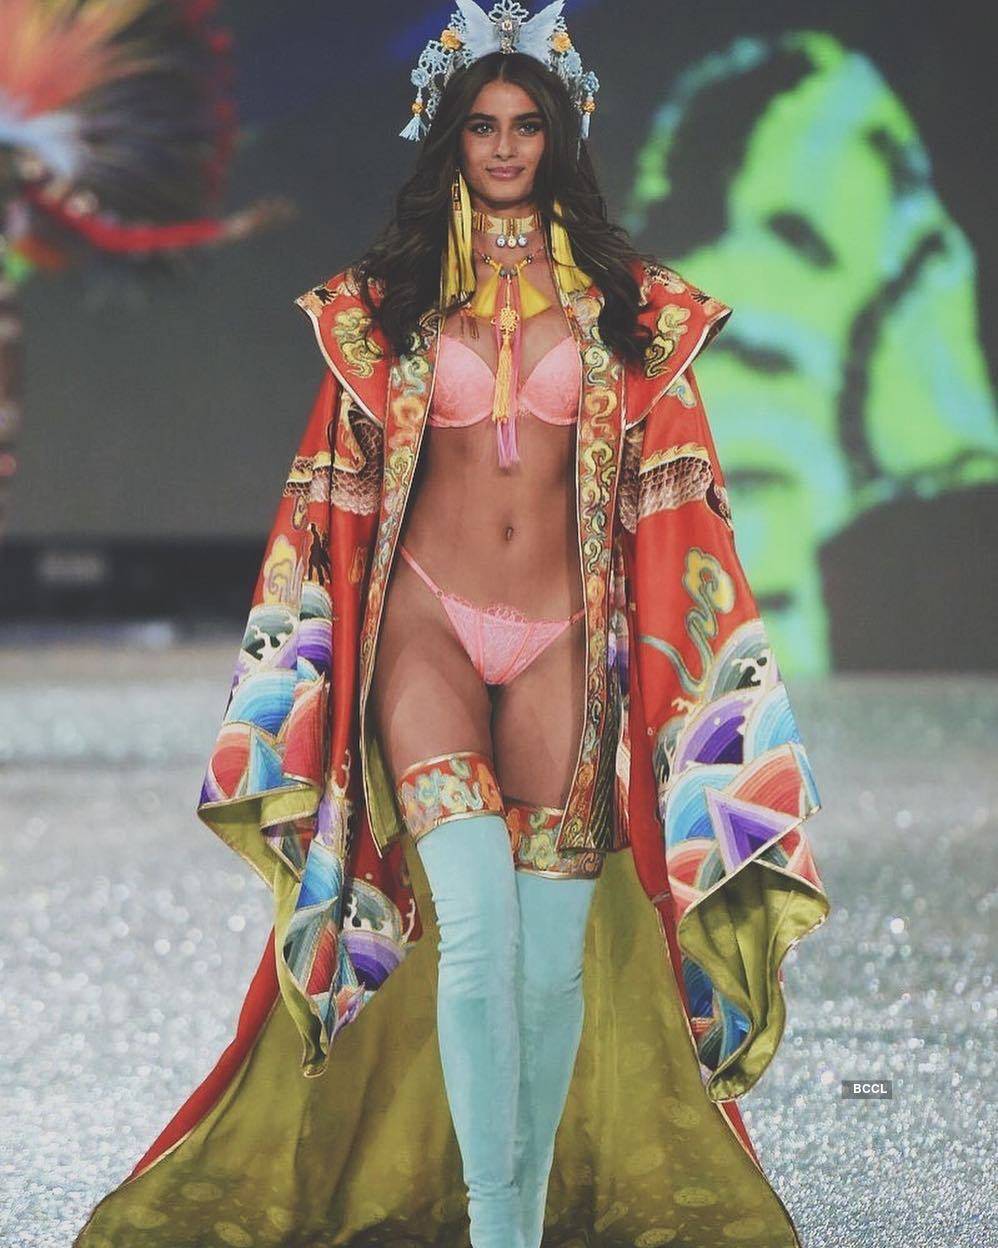 Victoria's Secret model Taylor Hill was discovered at the age of 14